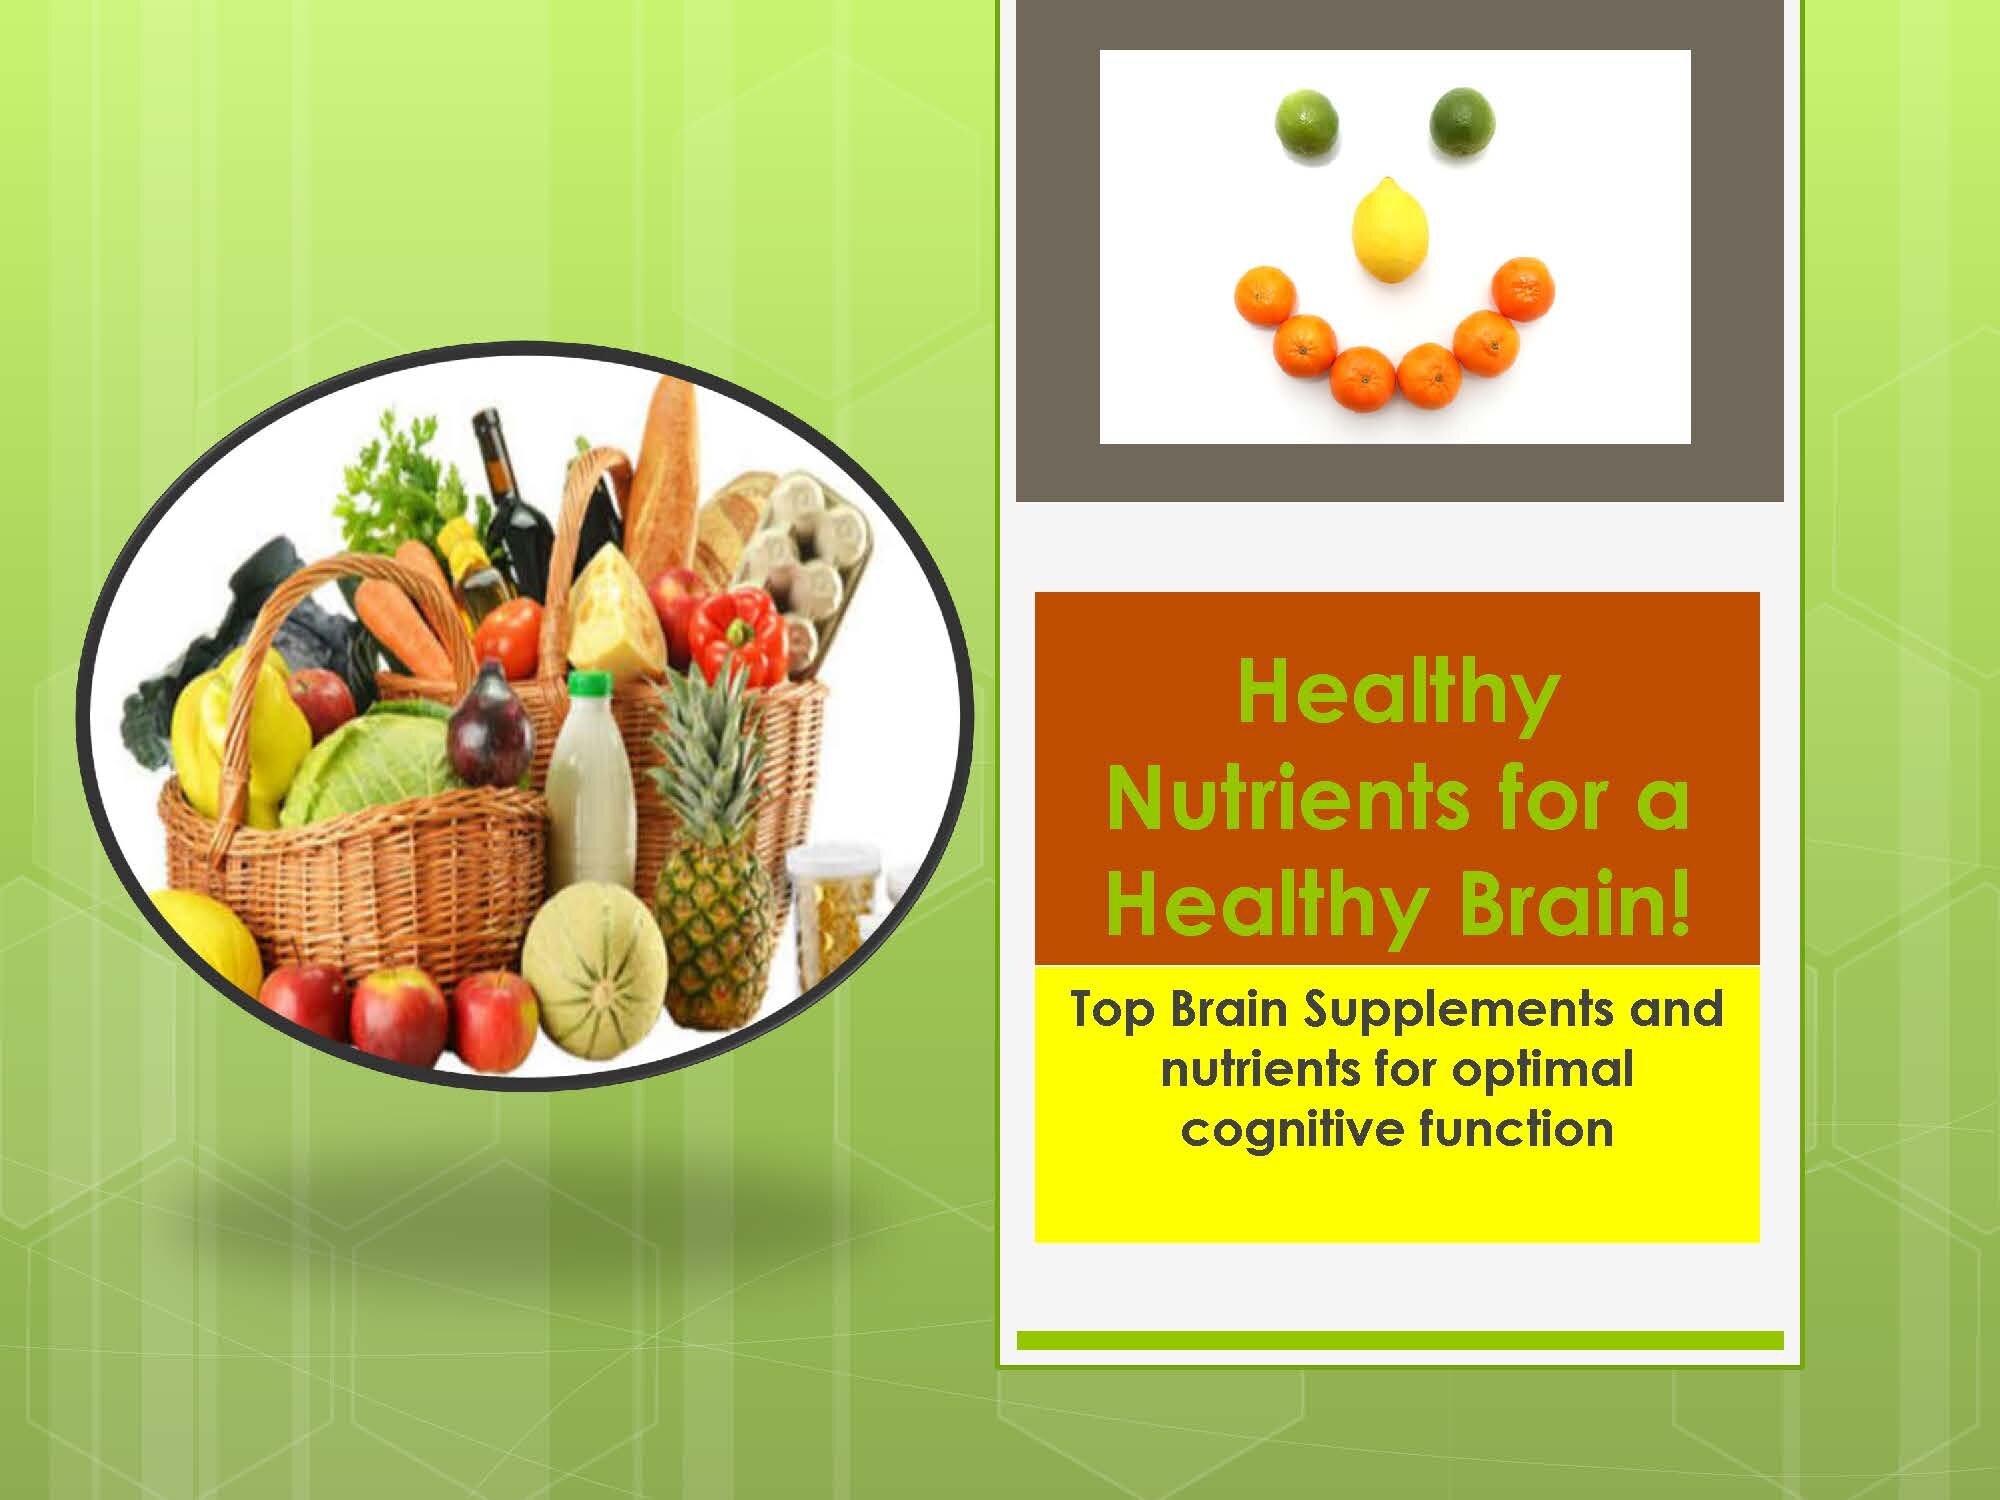 Healthy Nutrients for a Healthy BrainSS!_Page_01.jpg